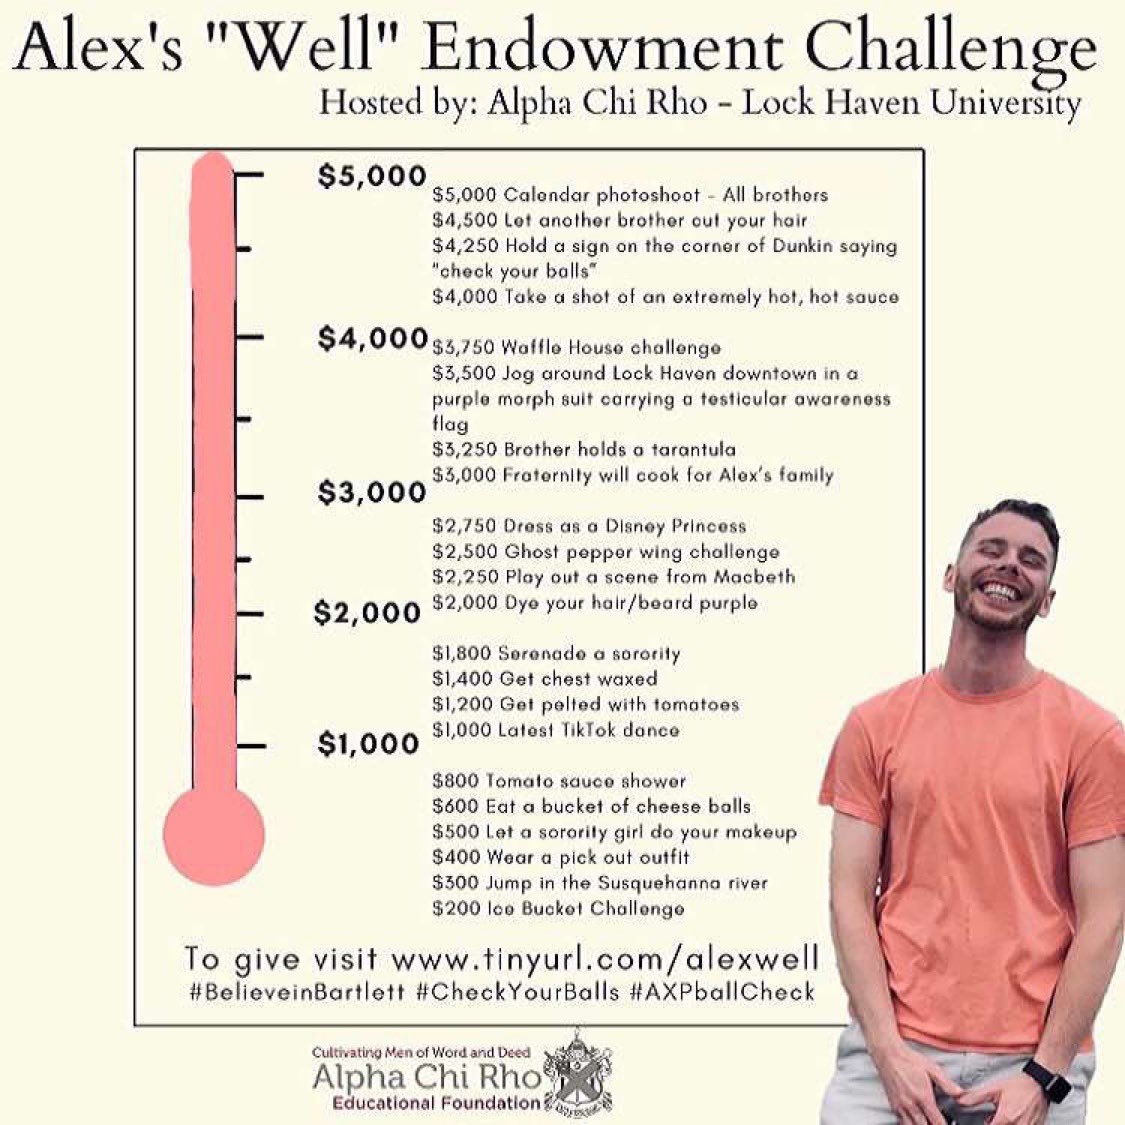 Not even two full days and we’ve crushed our goal! New graphic coming tomorrow with a new goal of $10,000! (Challenges to come along with). Let’s keep the donations rolling for Alex!! #BelieveinBartlett #CheckYourBalls #AXPballCheck